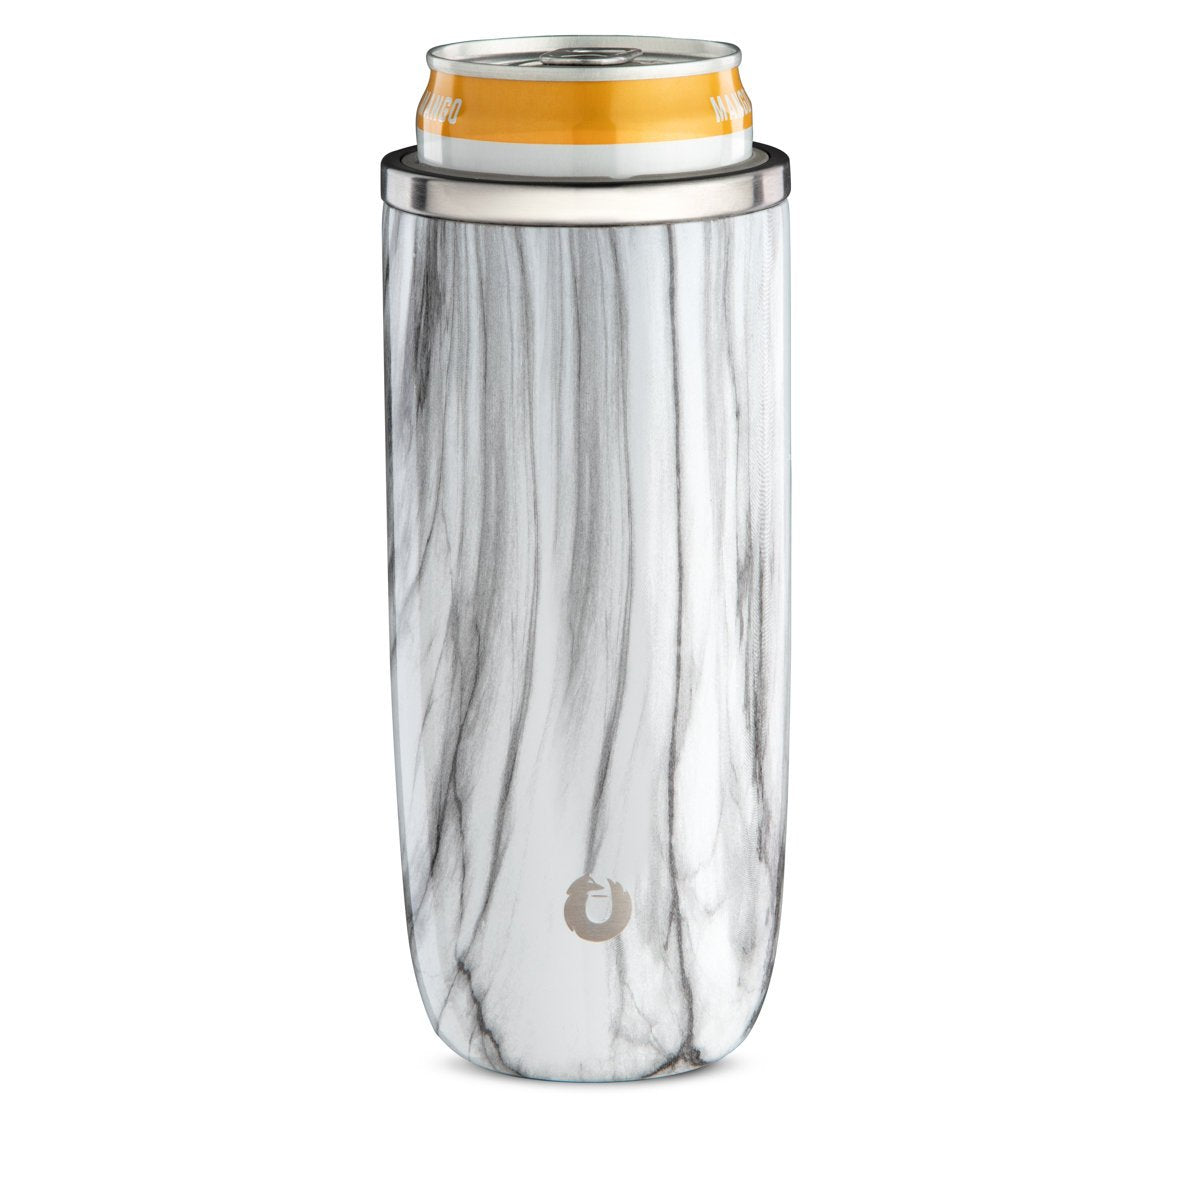 12oz Insulated Slim Can Cooler by Snowfox